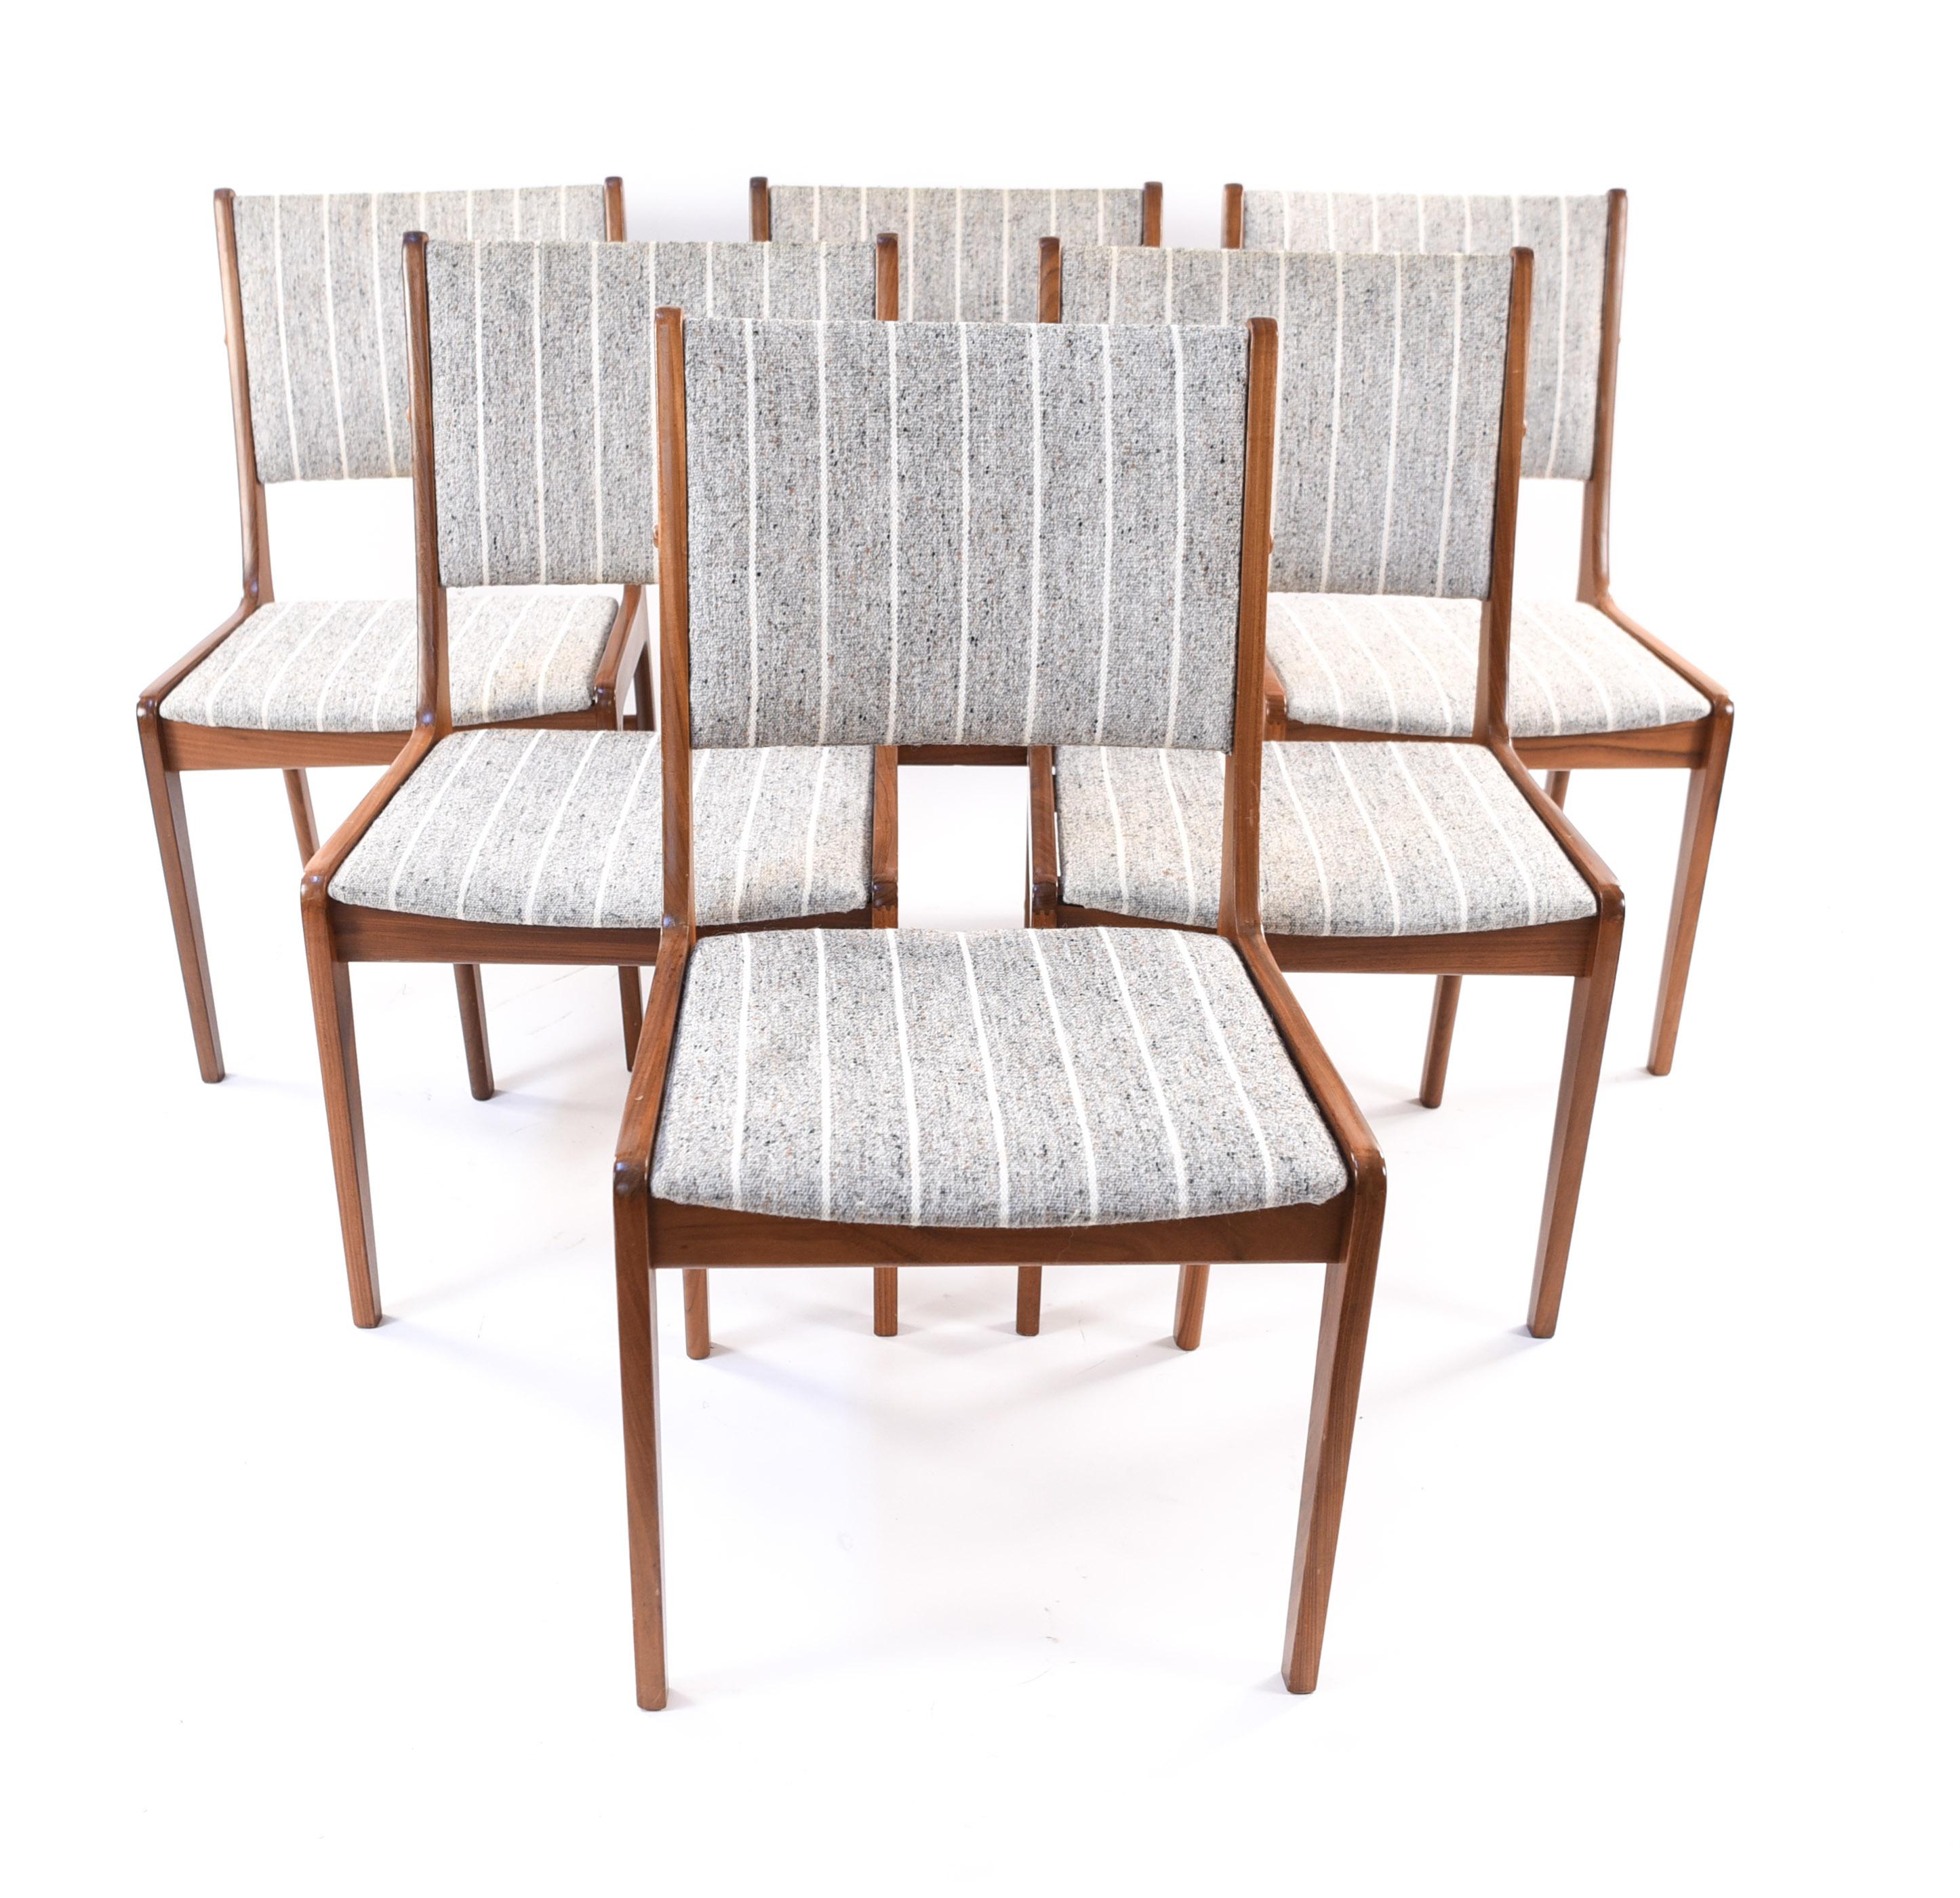 A set of six Danish midcentury Fastrup dining chairs in model 7701 by Sax. With simple, pleasing frames of teak and neutral colored striped upholstery. The perfect set to fit around your dining table!